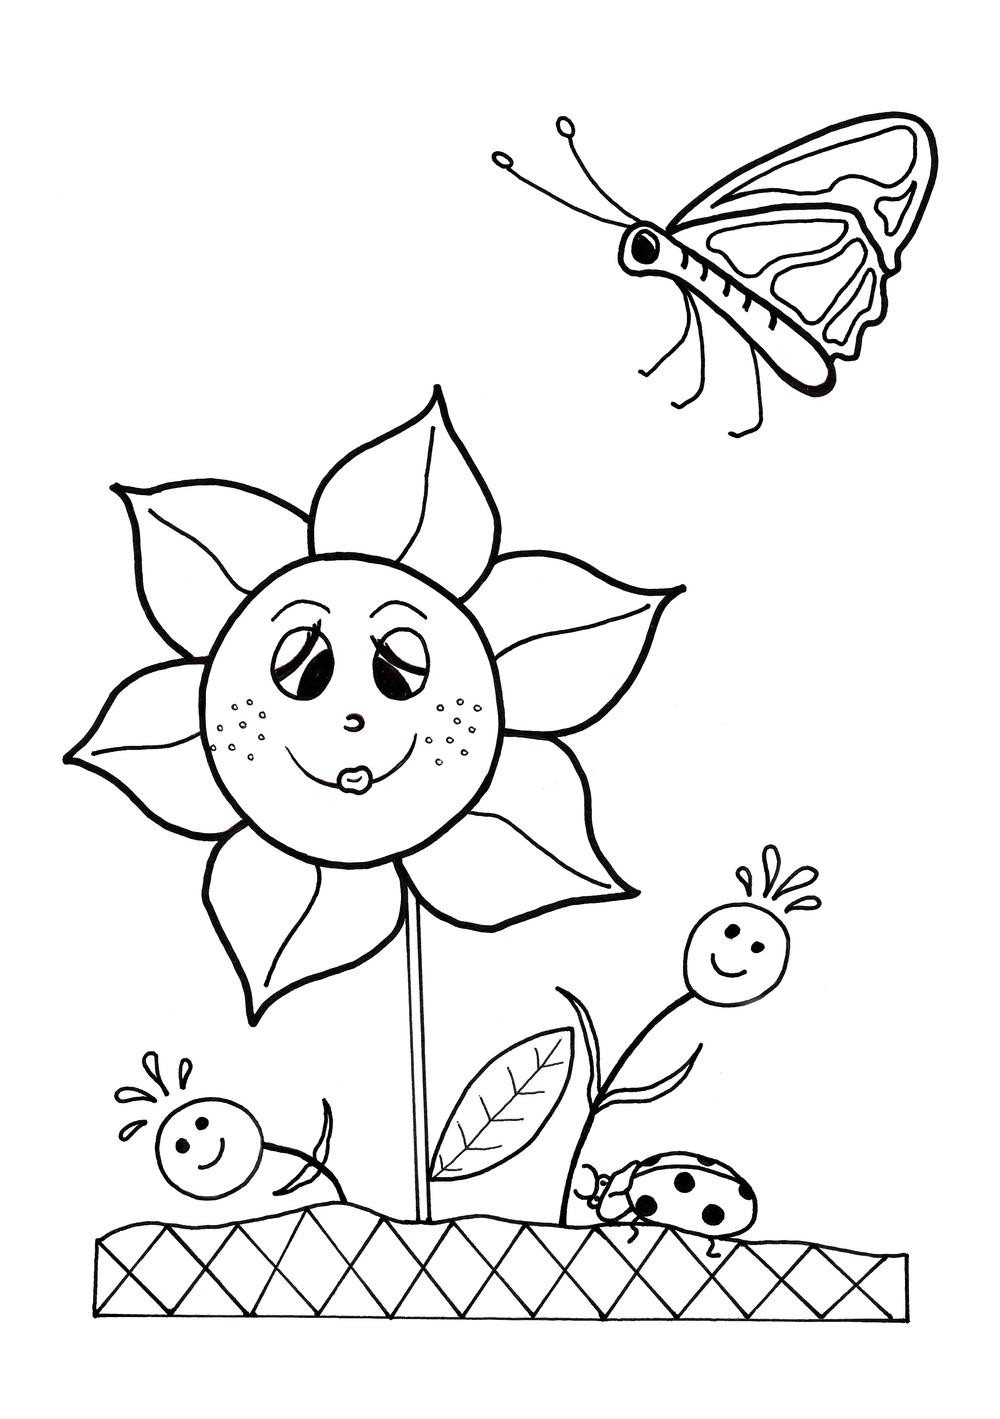 Spring Coloring Sheets For Kids
 Dancing Flowers Spring Coloring Sheet